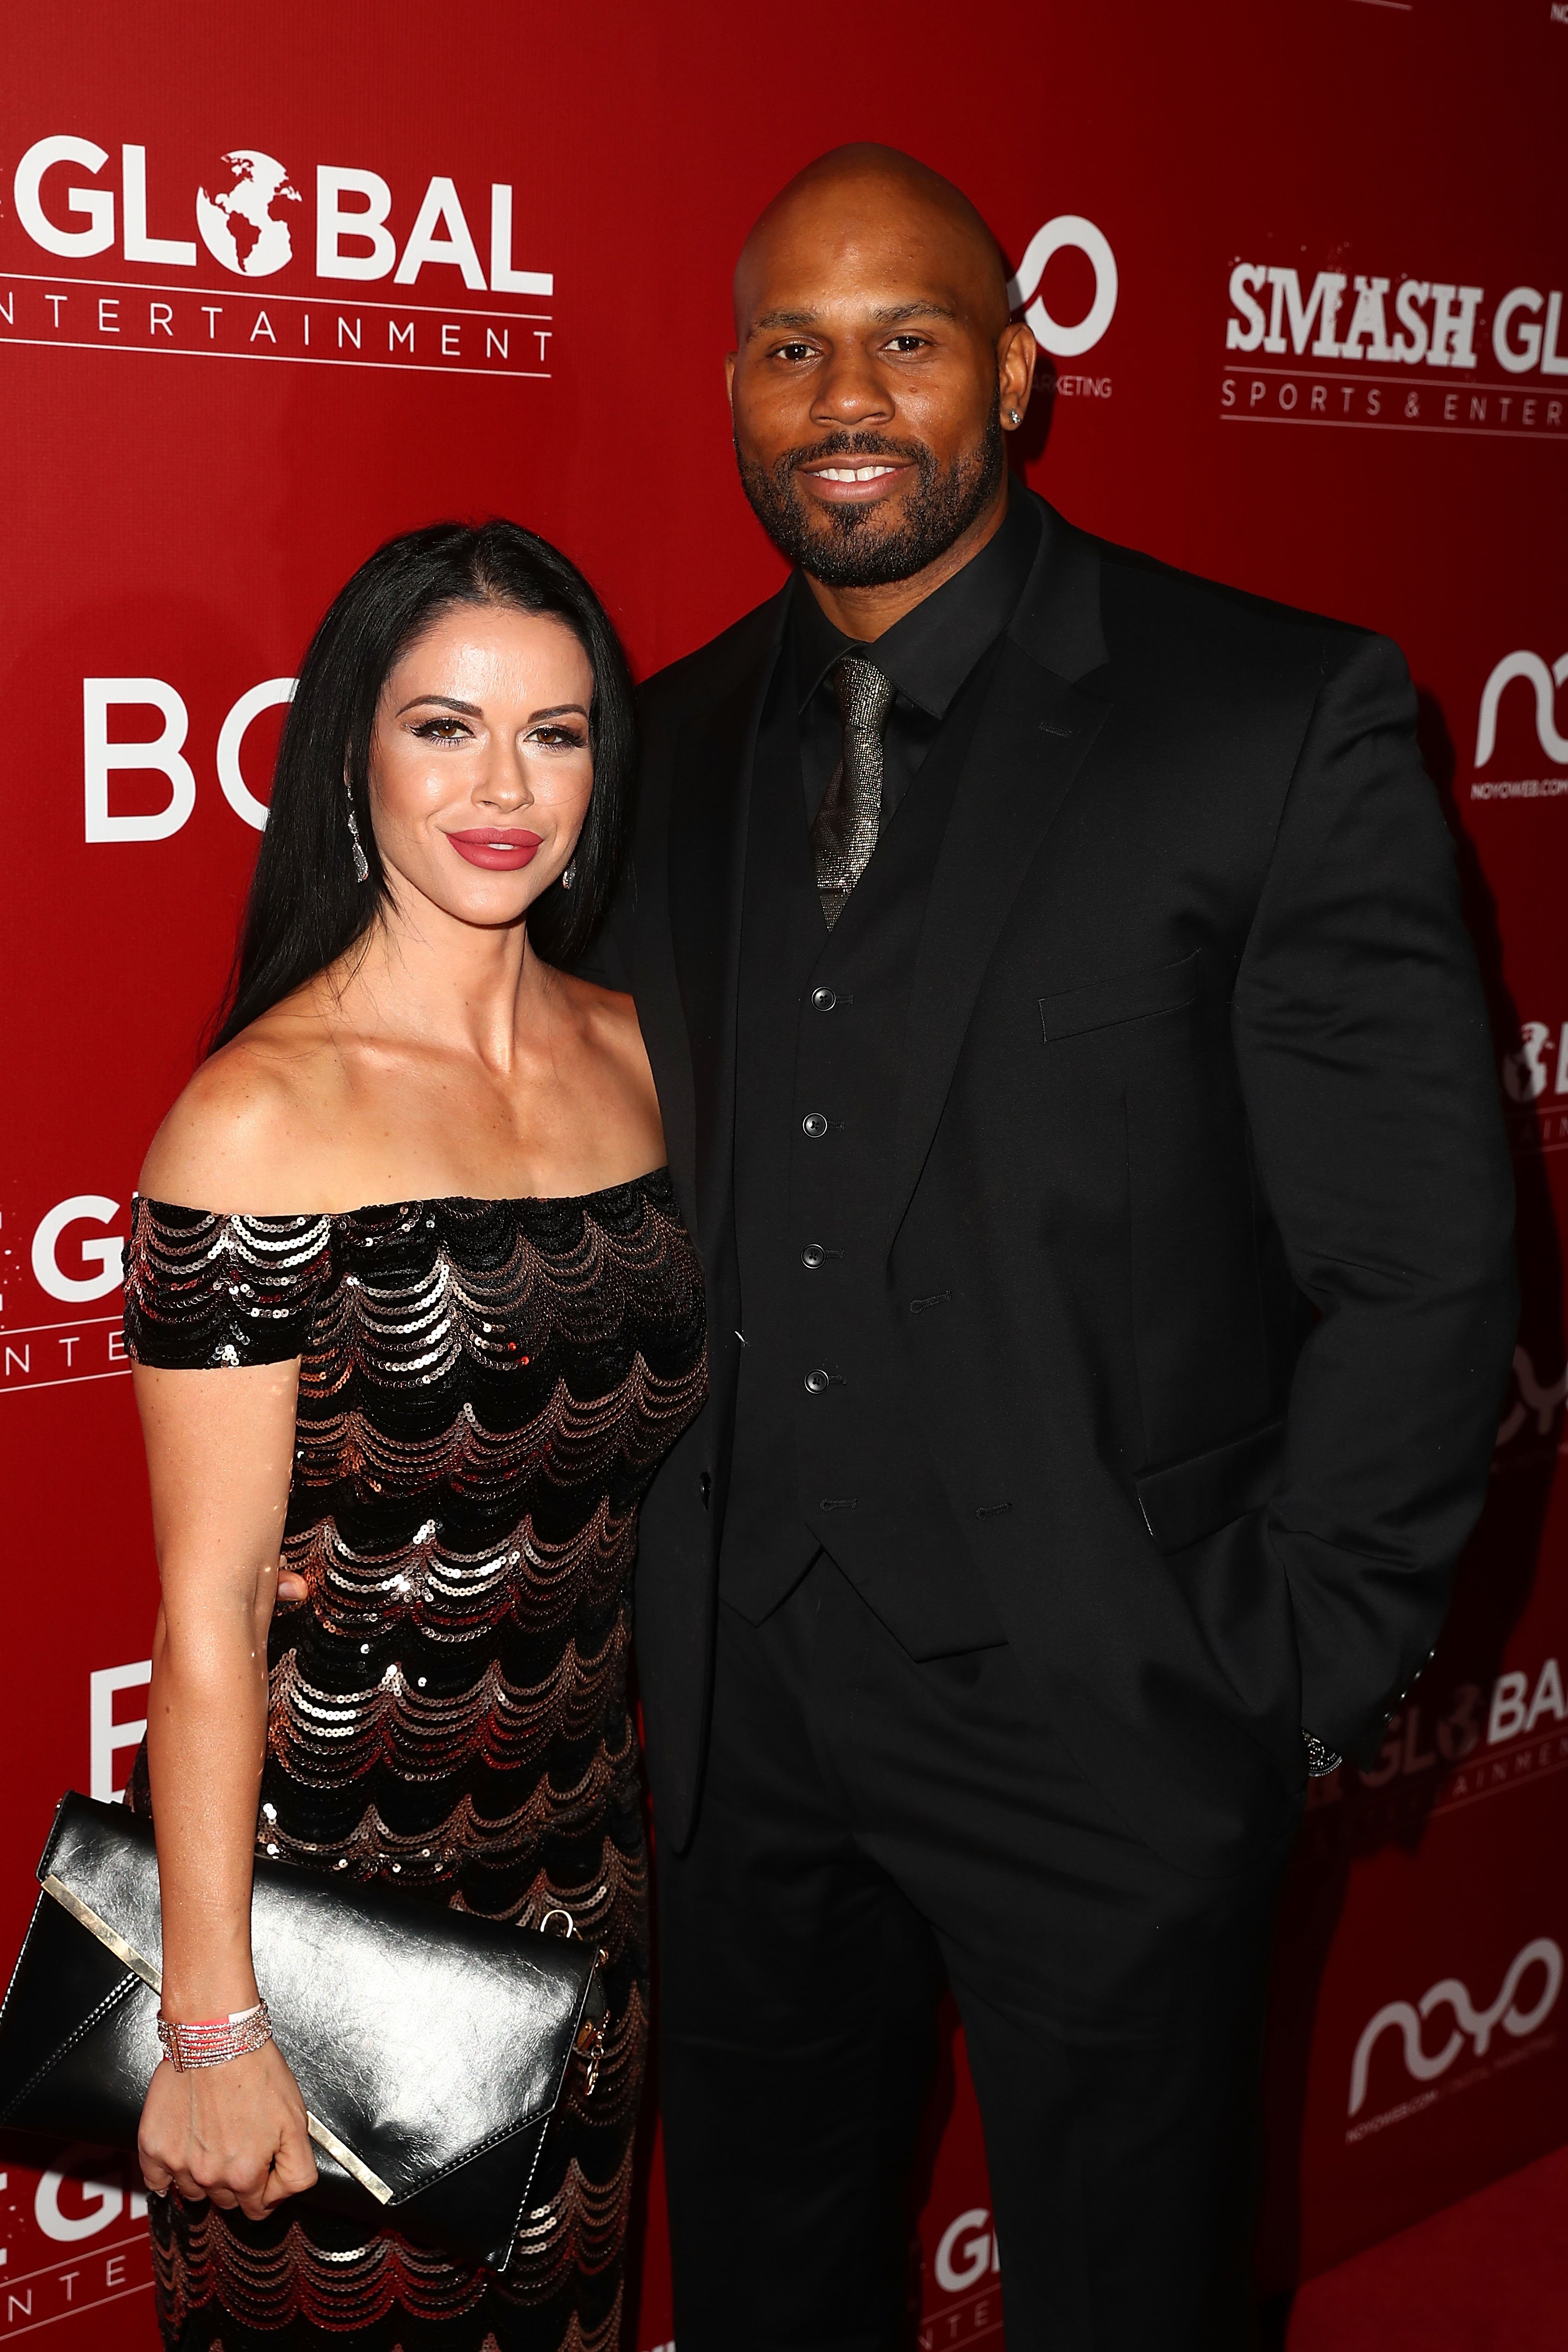 Siliana and Shad Gaspard attend SMASH Global VIII ñ Night Of Champions on December 13, 2018, in Hollywood, California. | Photo: Getty Images.